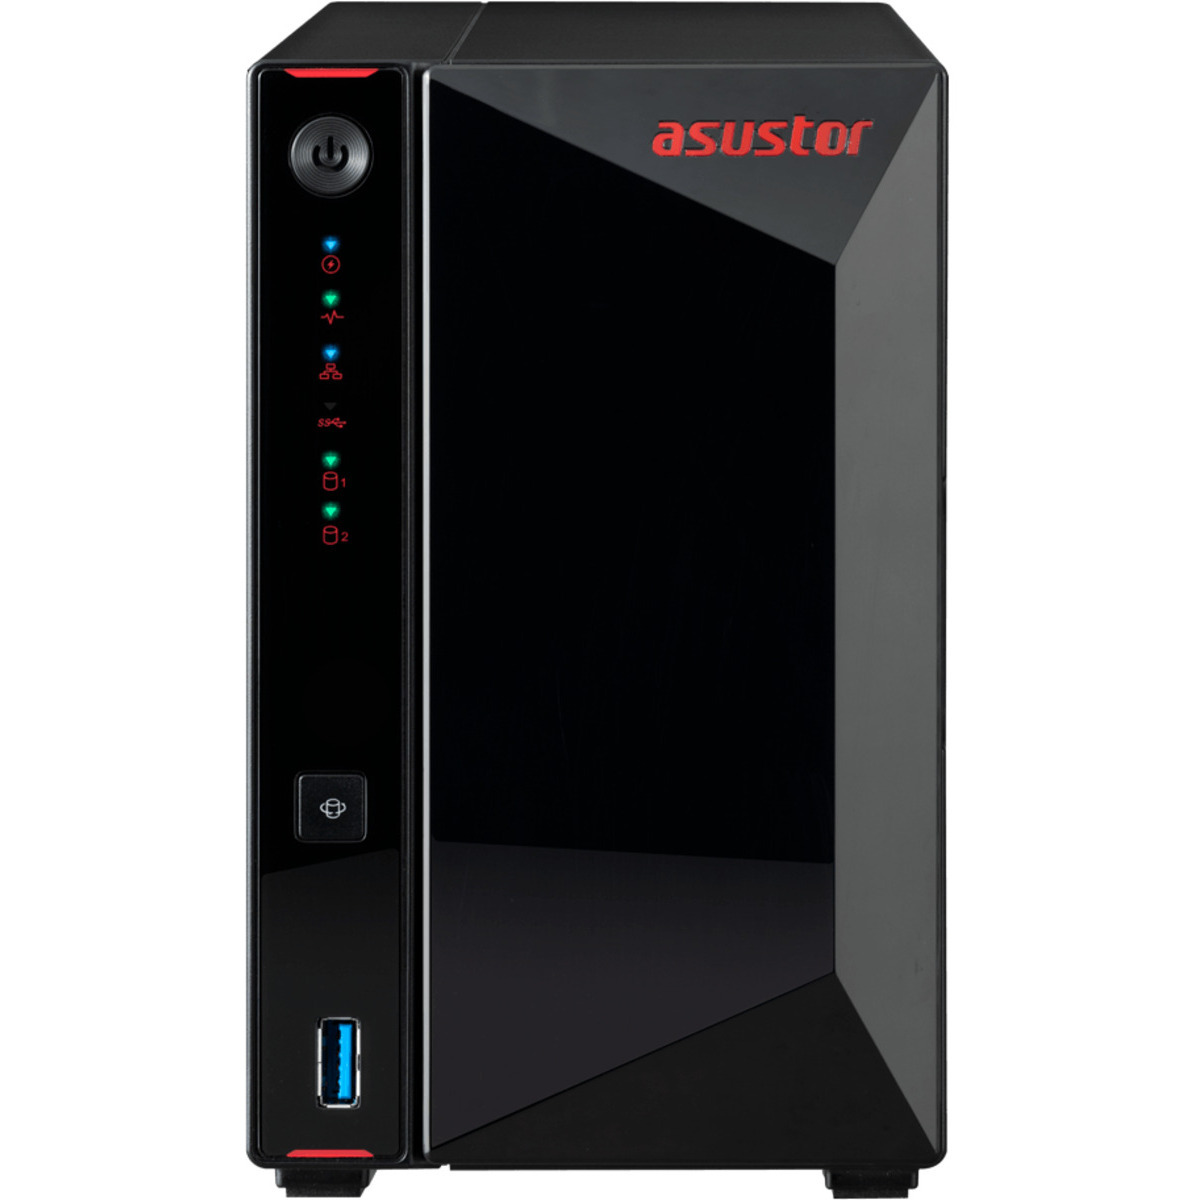 buy $681 ASUSTOR AS5202T Nimbustor 16tb Desktop NAS - Network Attached Storage Device 2x8000gb Toshiba Enterprise Capacity MG08ADA800E 3.5 7200rpm SATA 6Gb/s HDD ENTERPRISE Class Drives Installed - Burn-In Tested - ON SALE - FREE RAM UPGRADE - nas headquarters buy network attached storage server device das new raid-5 free shipping usa AS5202T Nimbustor